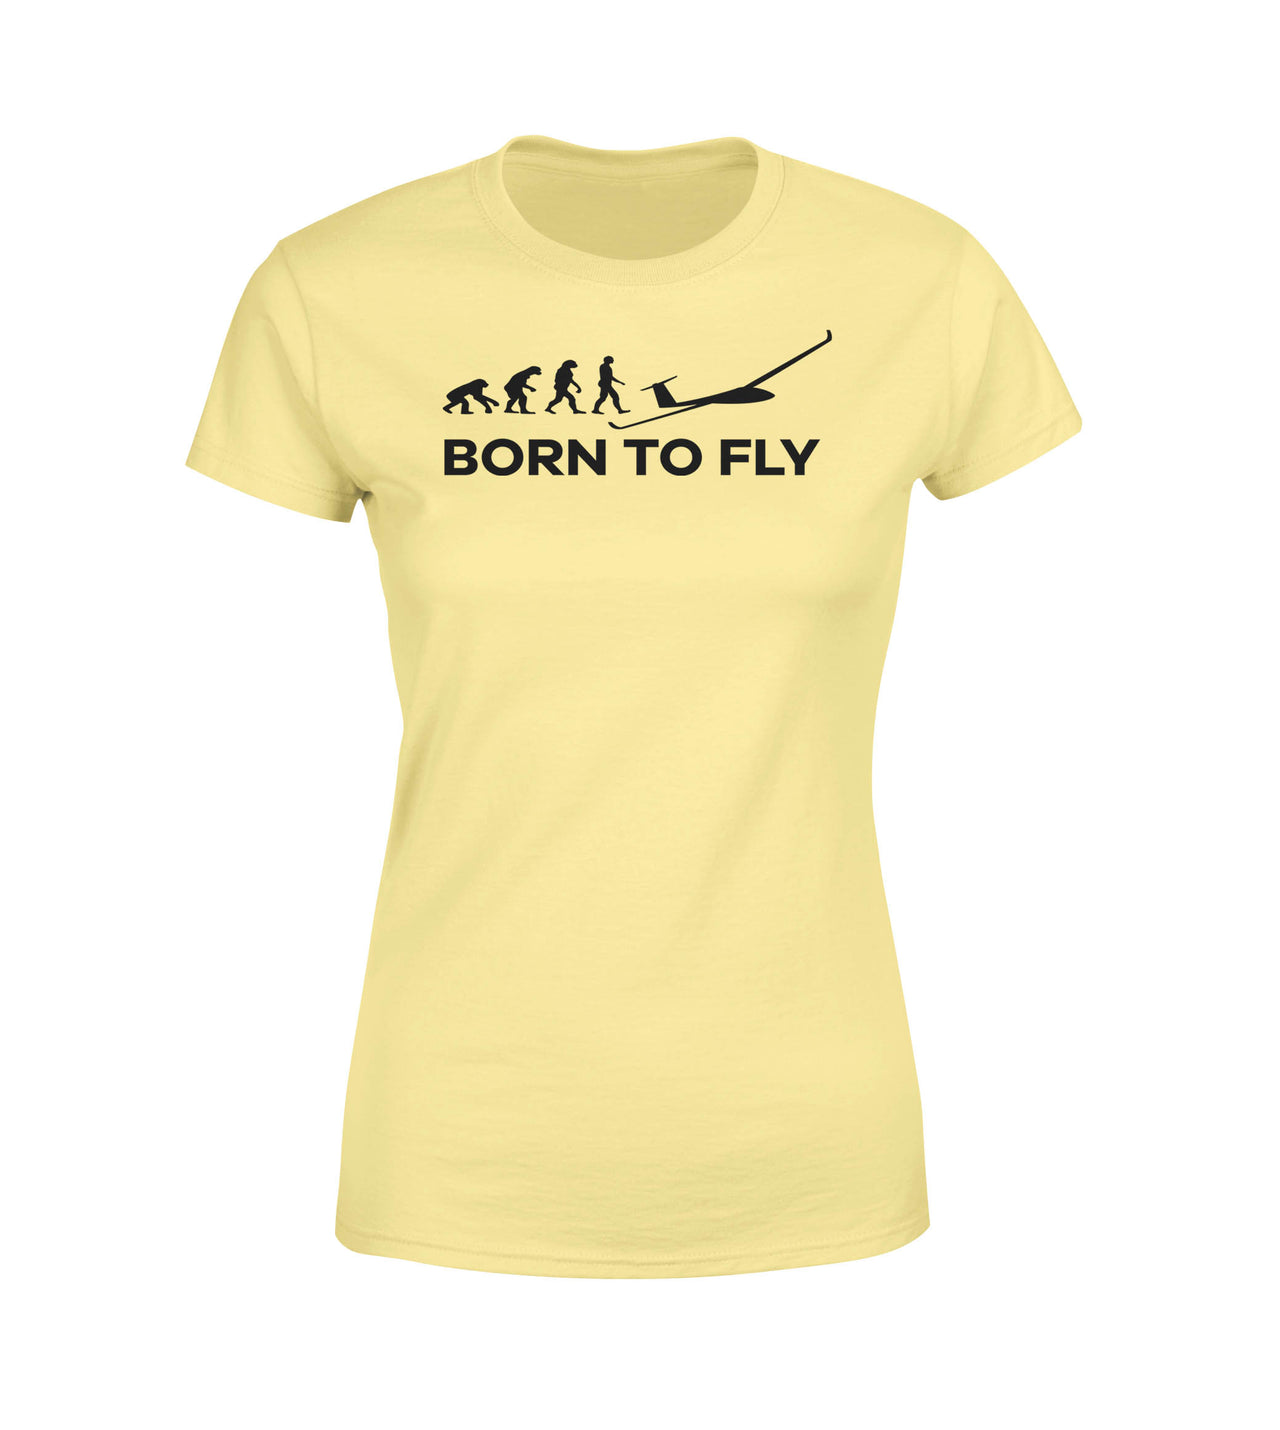 Born To Fly Glider Designed Women T-Shirts